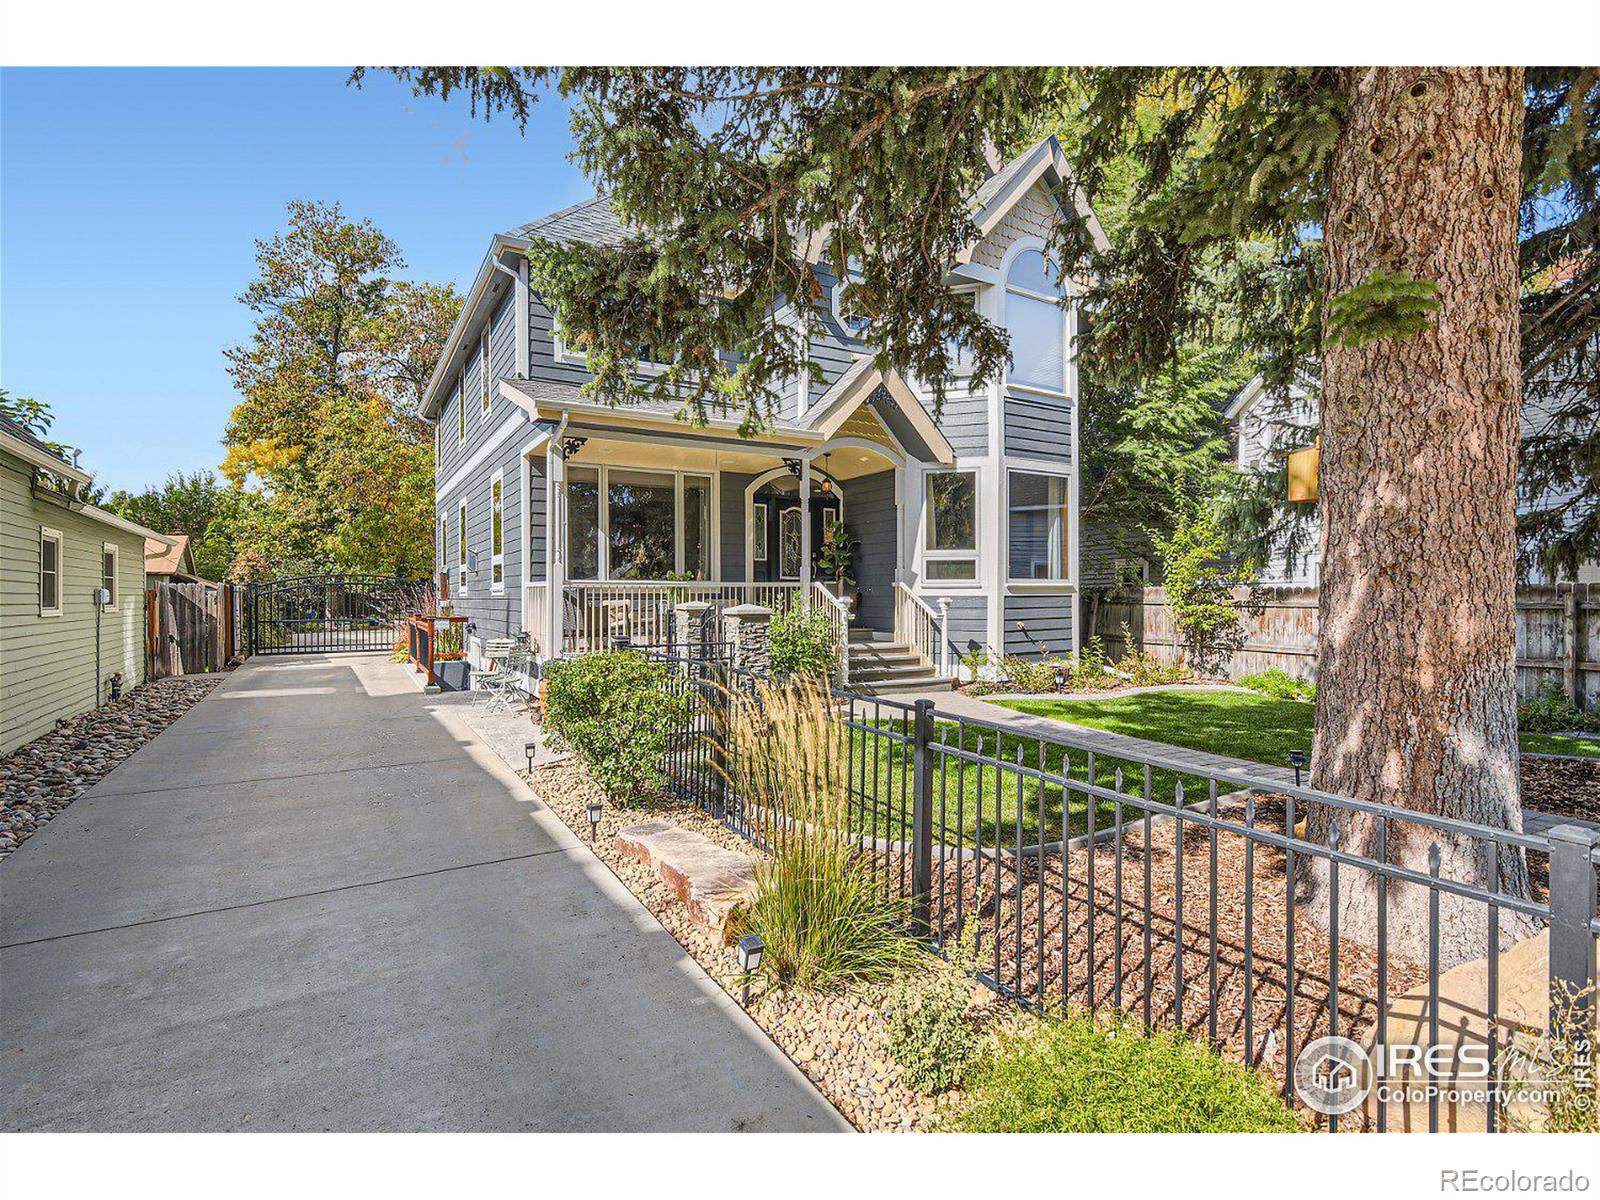 Report Image for 321 N Meldrum Street,Fort Collins, Colorado